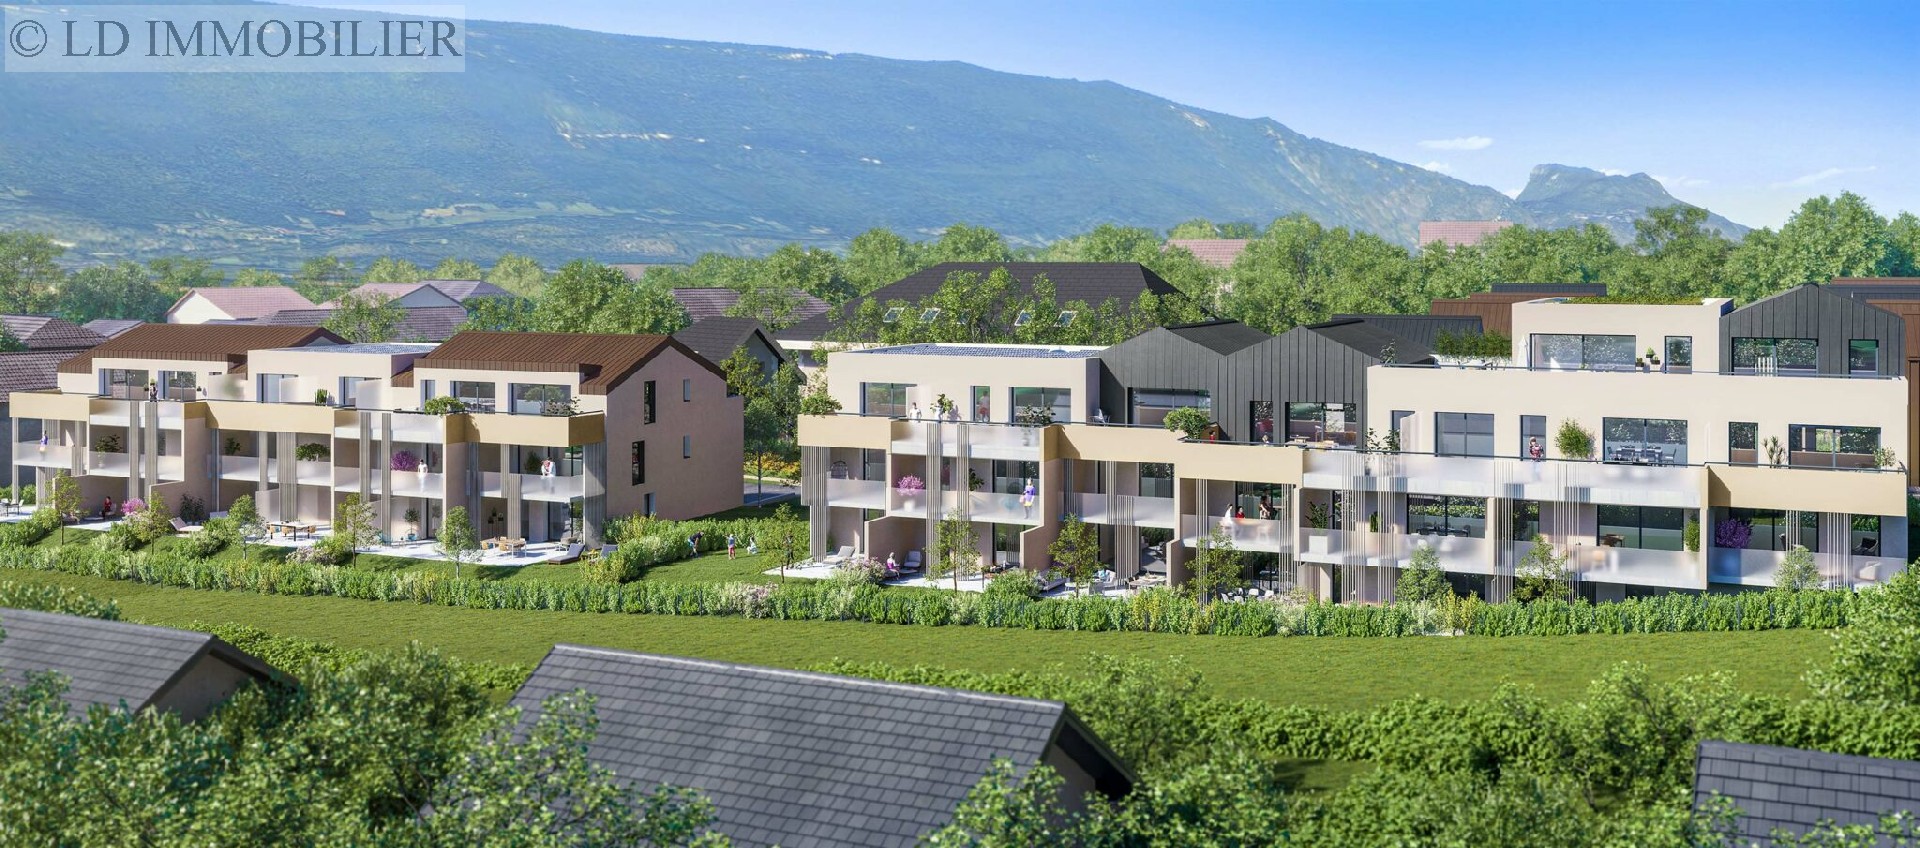 Vente appartement - CHAMBERY 102,1 m², 4 pièces